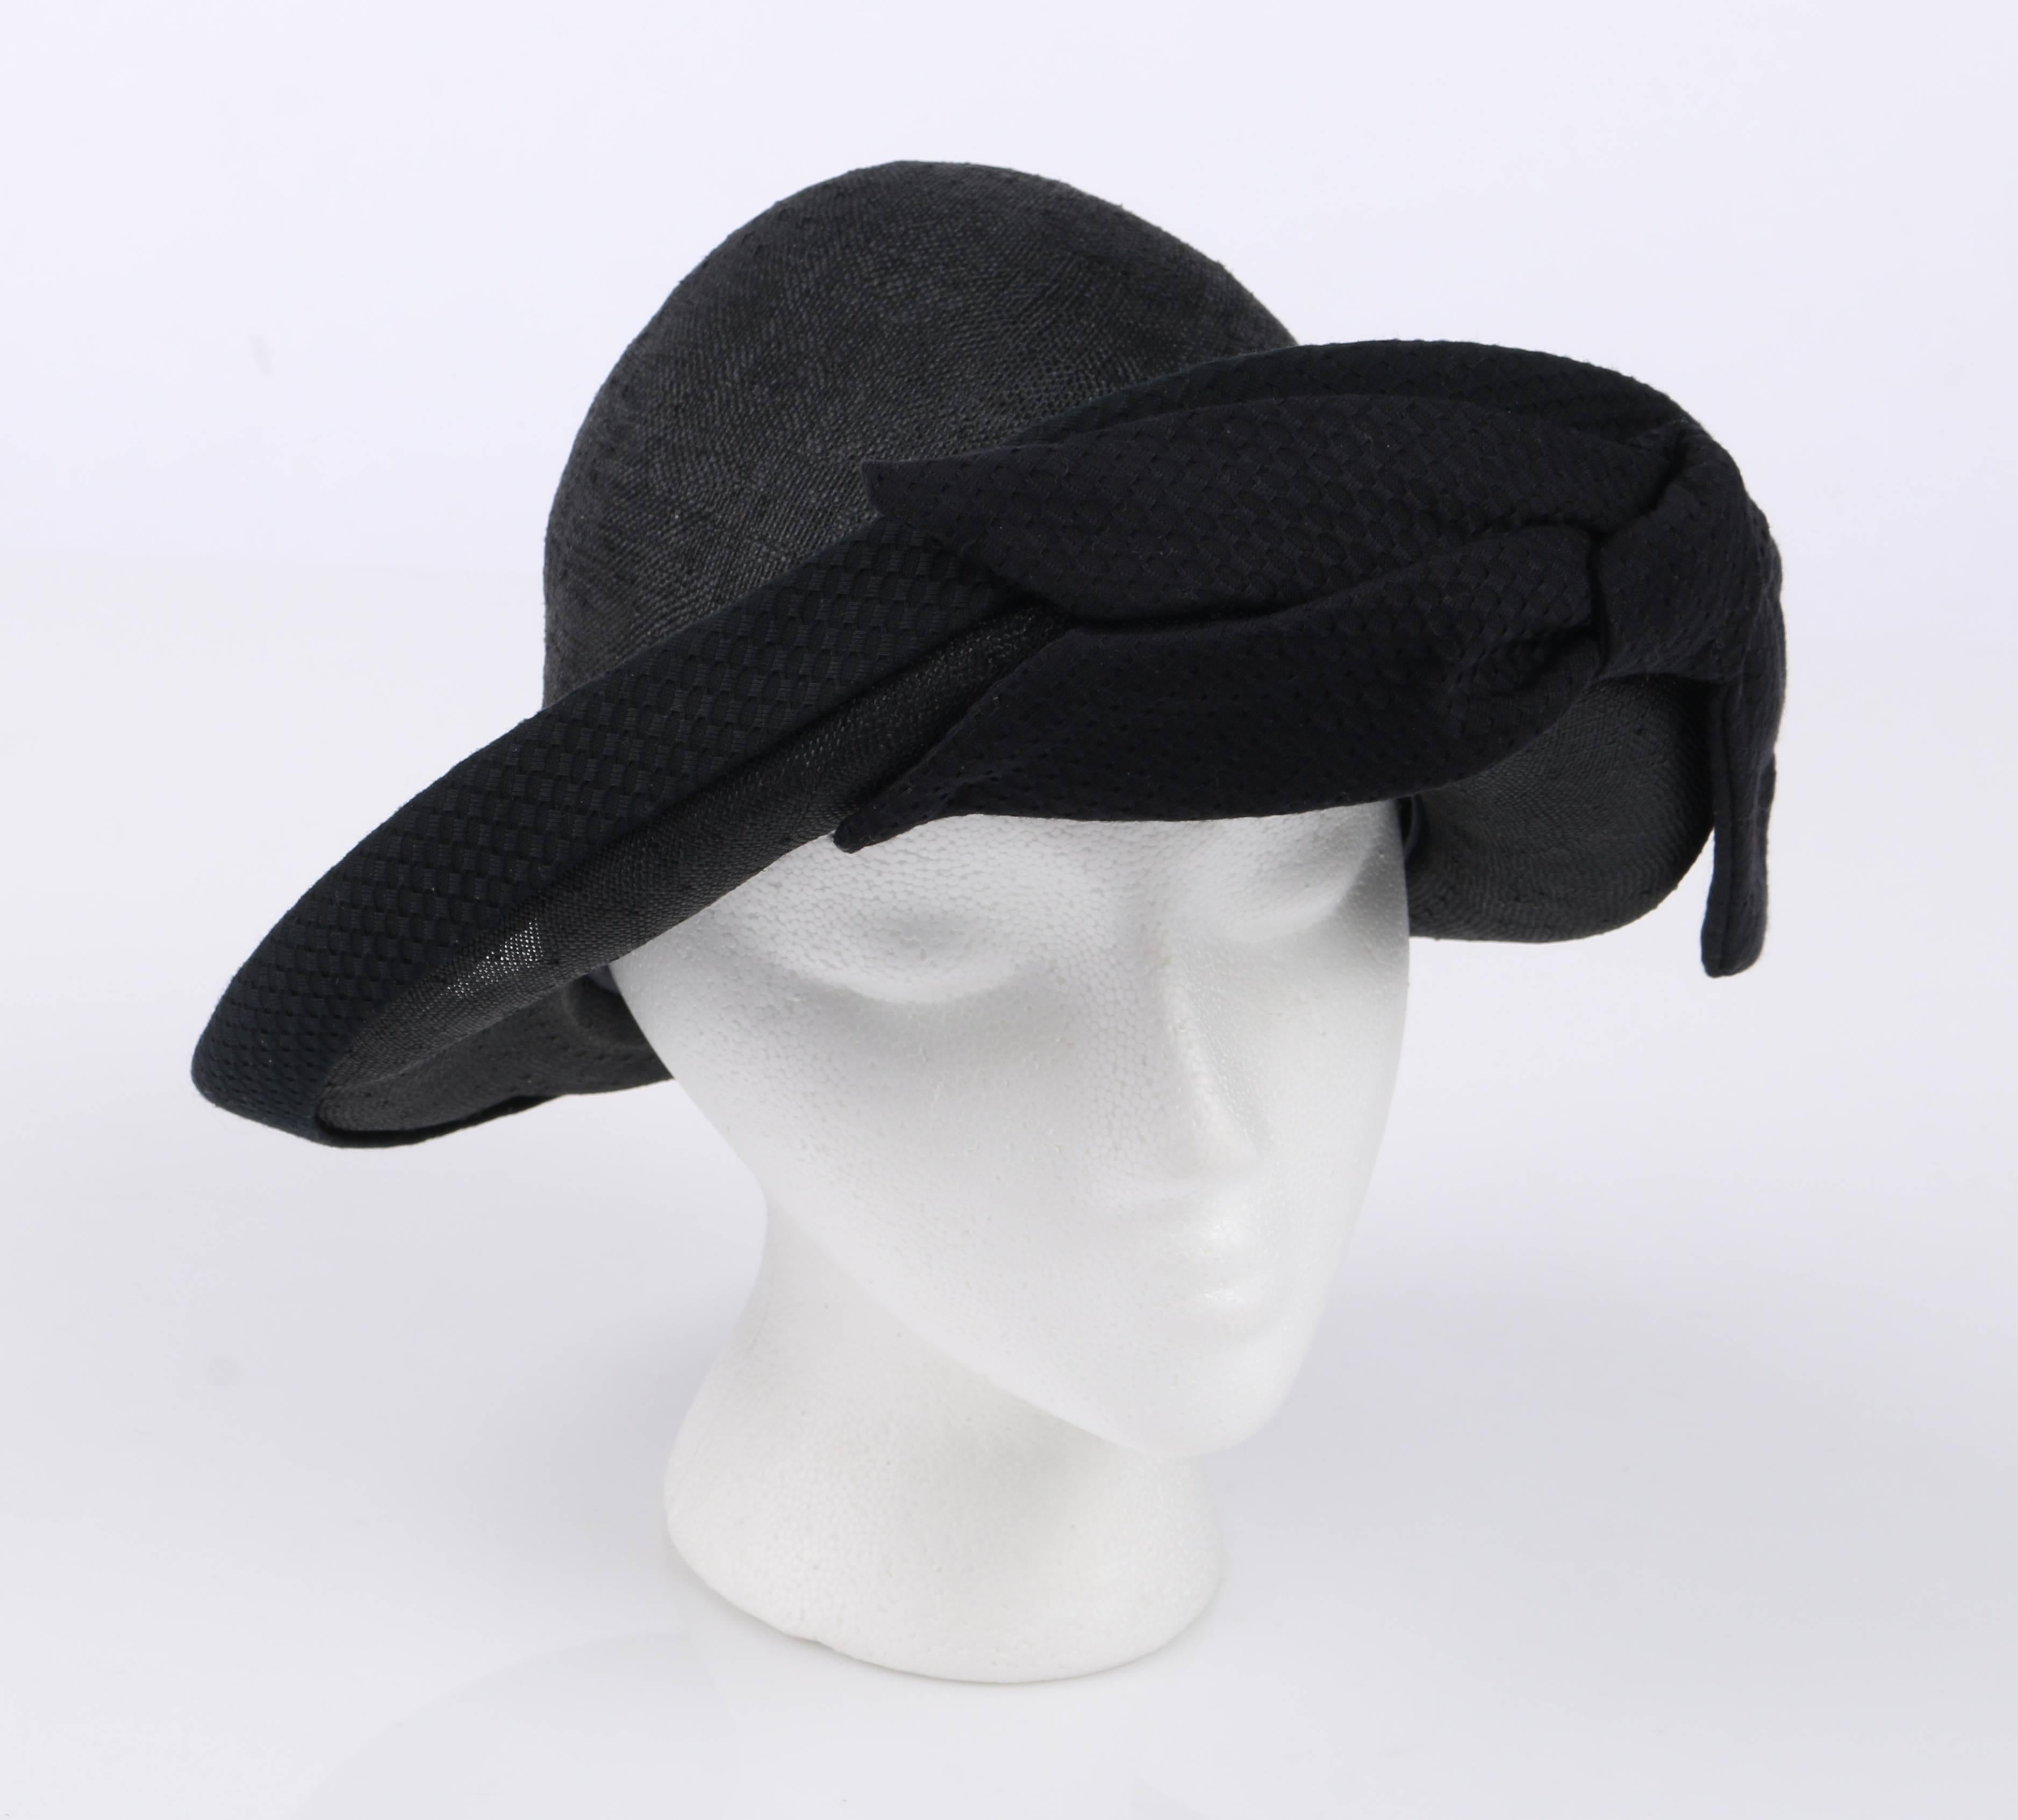 Oscar De La Renta Millinery black woven straw vegabond style hat. Asymmetrical turned up brim. Side front abstract bow. Textured cotton fabric detail around edge of brim, hat band, and bow. Black grosgrain ribbon along interior edge. Unmarked Fabric